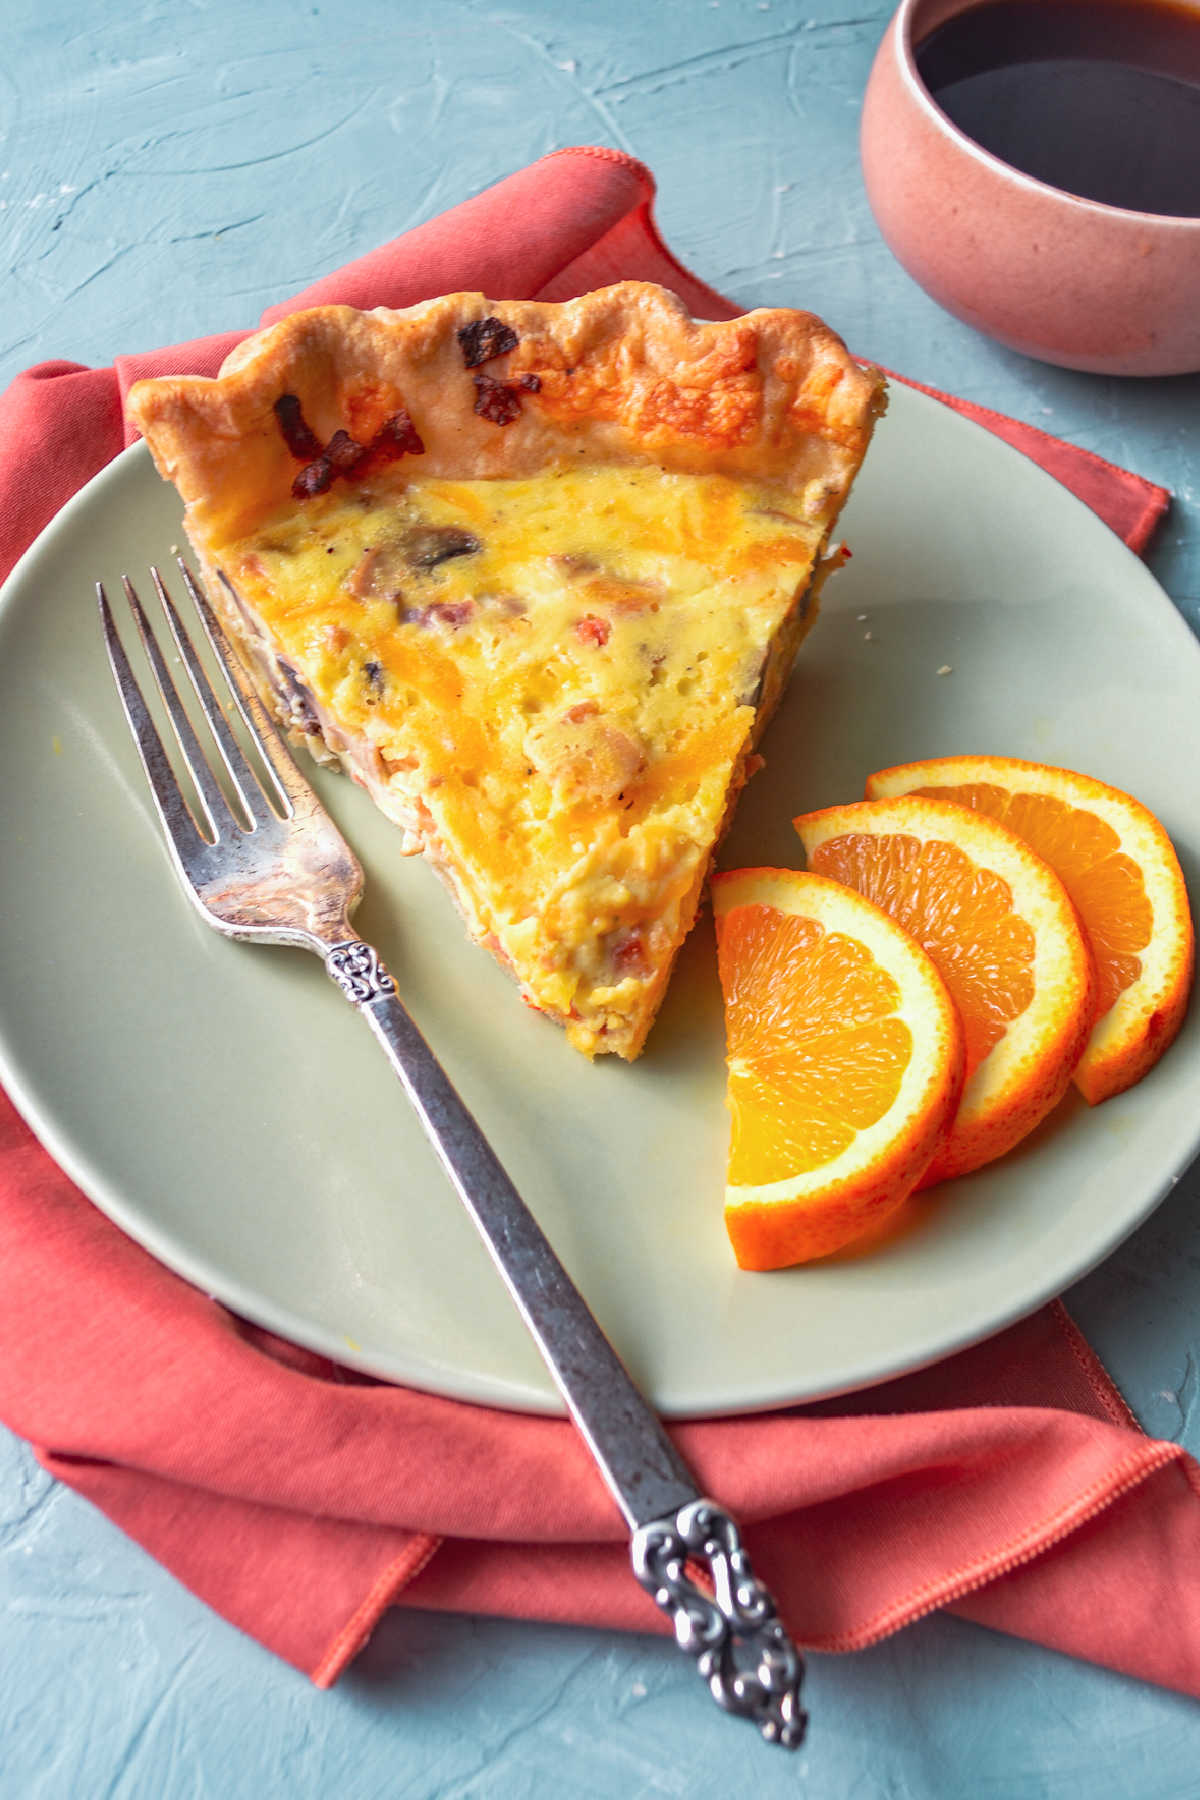 Breakfast plate with slice of quiche, fork orange slices and a cup of coffee ready to eat. 